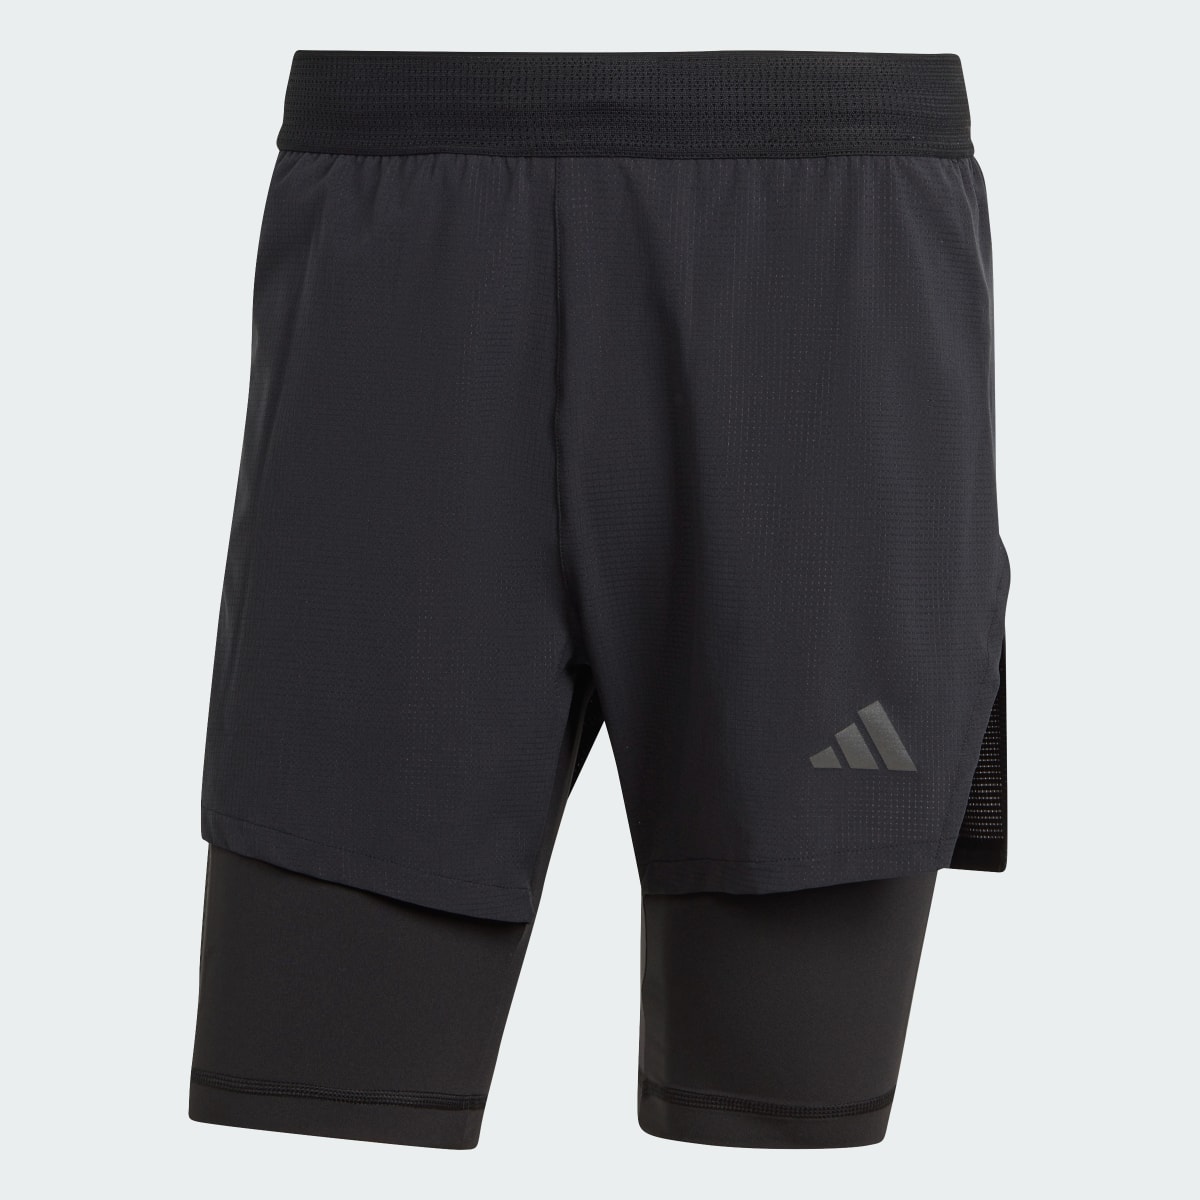 Adidas HEAT.RDY HIIT Elevated Training 2-in-1 Shorts. 4